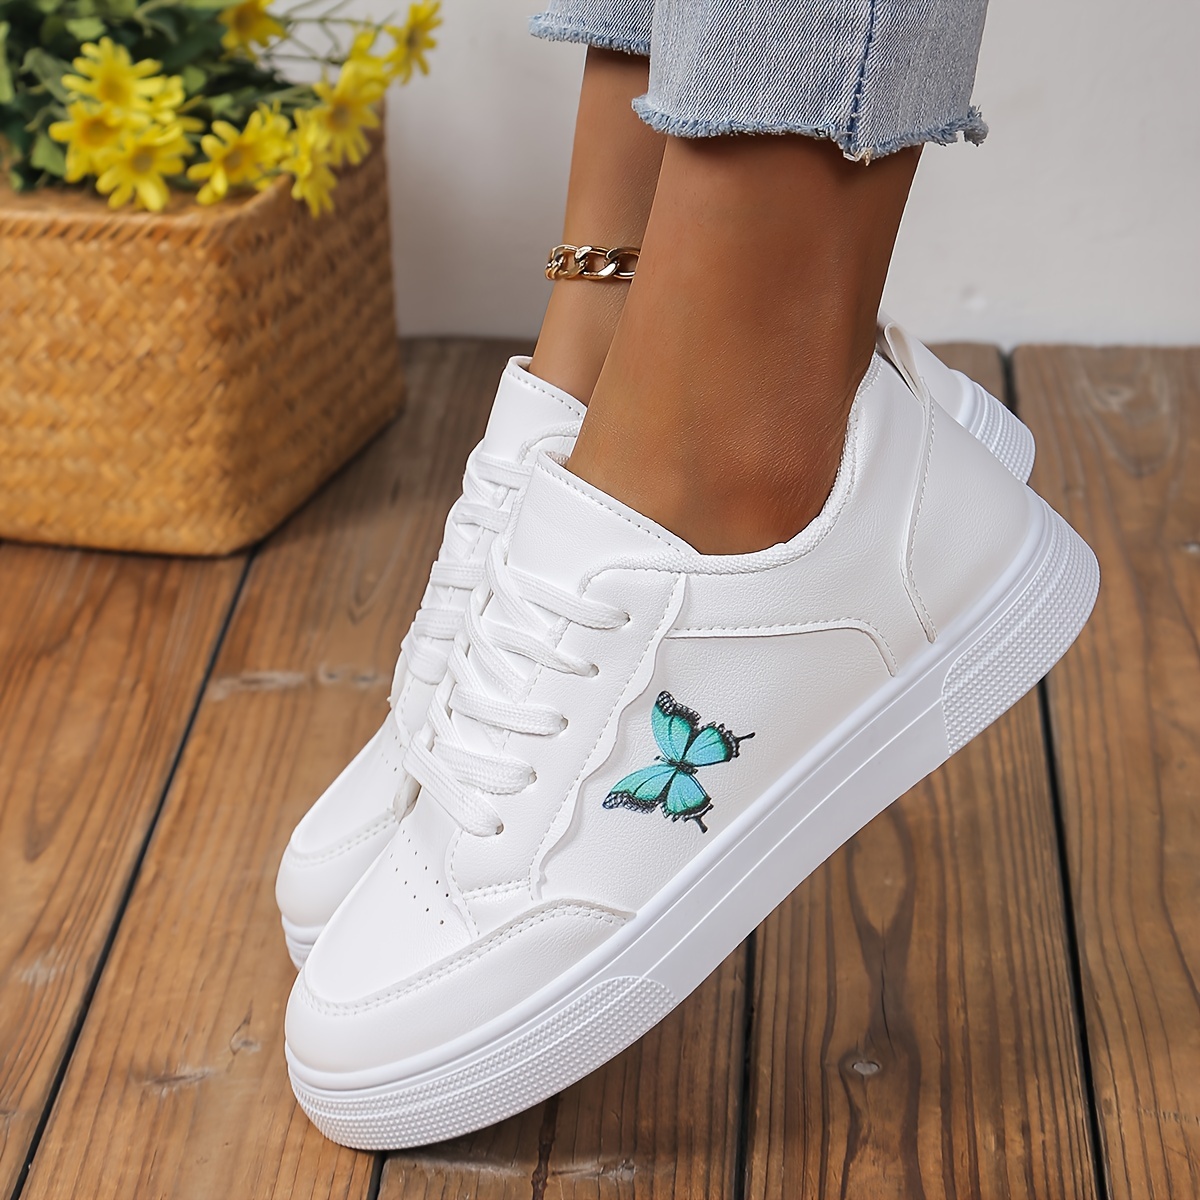 

Women's Butterfly Print Skate Shoes, All-match Round Toe Low Top Sneakers, Casual Lace Up Walking Flat Trainers